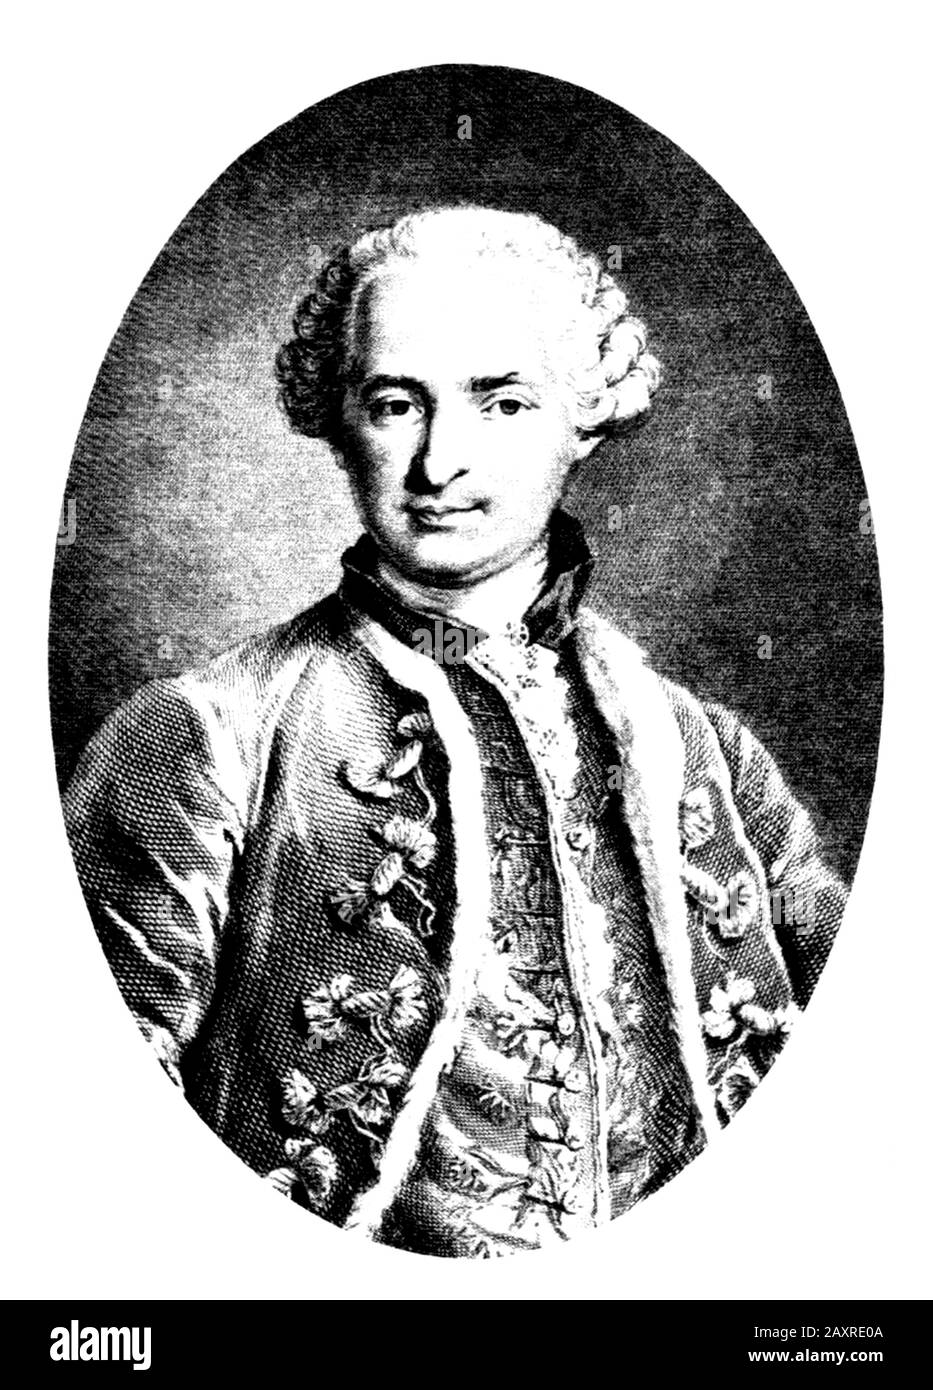 1750 ca, FRANCE : The mysterious french self-titled Count de SAINT GERMAIN ( 1710 ca - 1784 ), was a European adventurer, with an interest in Science , Alchemy and the Arts . Engraved portrait from the original  by Nicolas Thomas made in 1783, after a painting then owned by the Marquise d'Urfé and now lost , at time  contained at the Louvre galleries in France . - ALCHIMISTA - ALCHIMIA - ALCHIMISMO - Conte - Elisir di lunga vita - OCCULTO - OCCULTISTA - OCCULTISMO - OCCULT - OCCULTISM - MISTERO - MYSTERY - HISTORY - FOTO STORICHE - Magia - Magic - MAGO - portait - ritratto - engraving - incisi Stock Photo